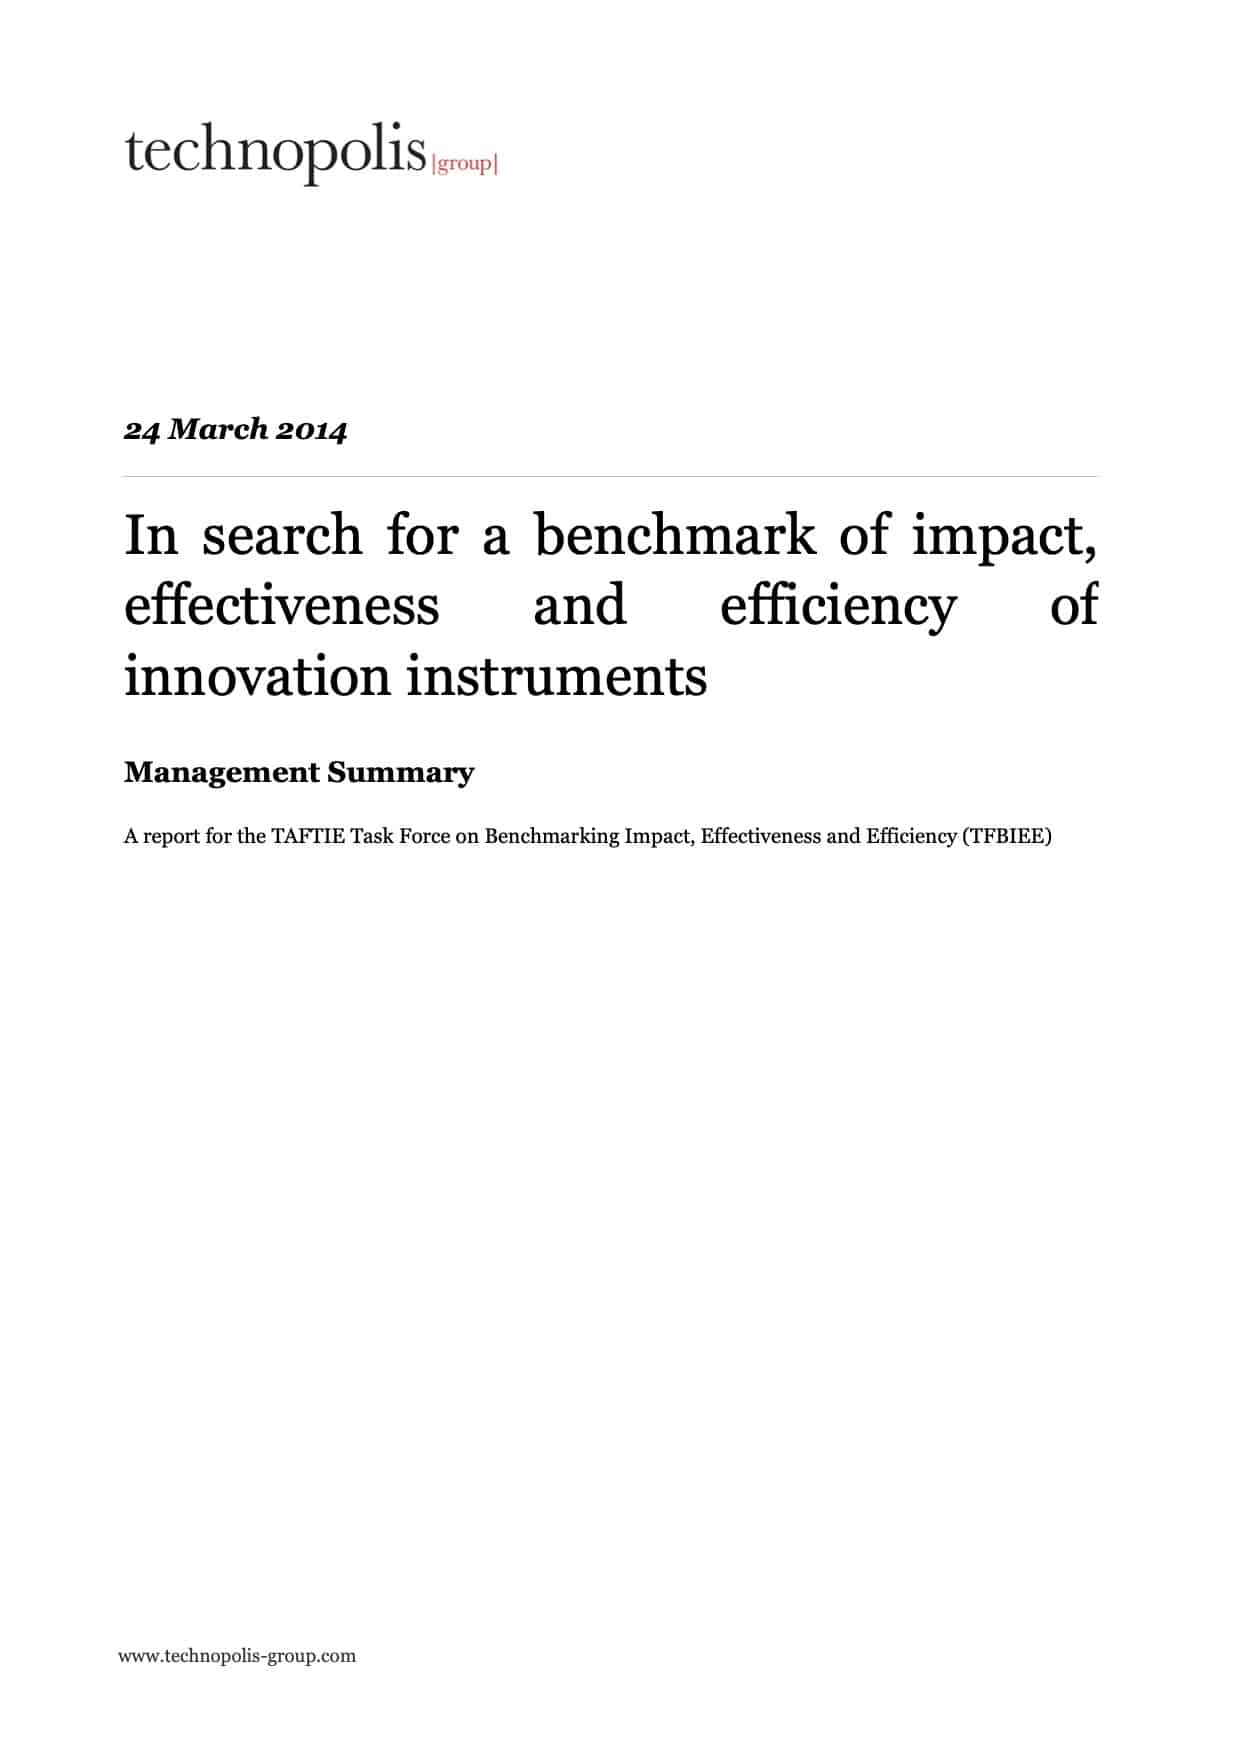 Benchmarking evaluation practices for The European Association for Innovation Agencies (TAFTIE) Management Summary